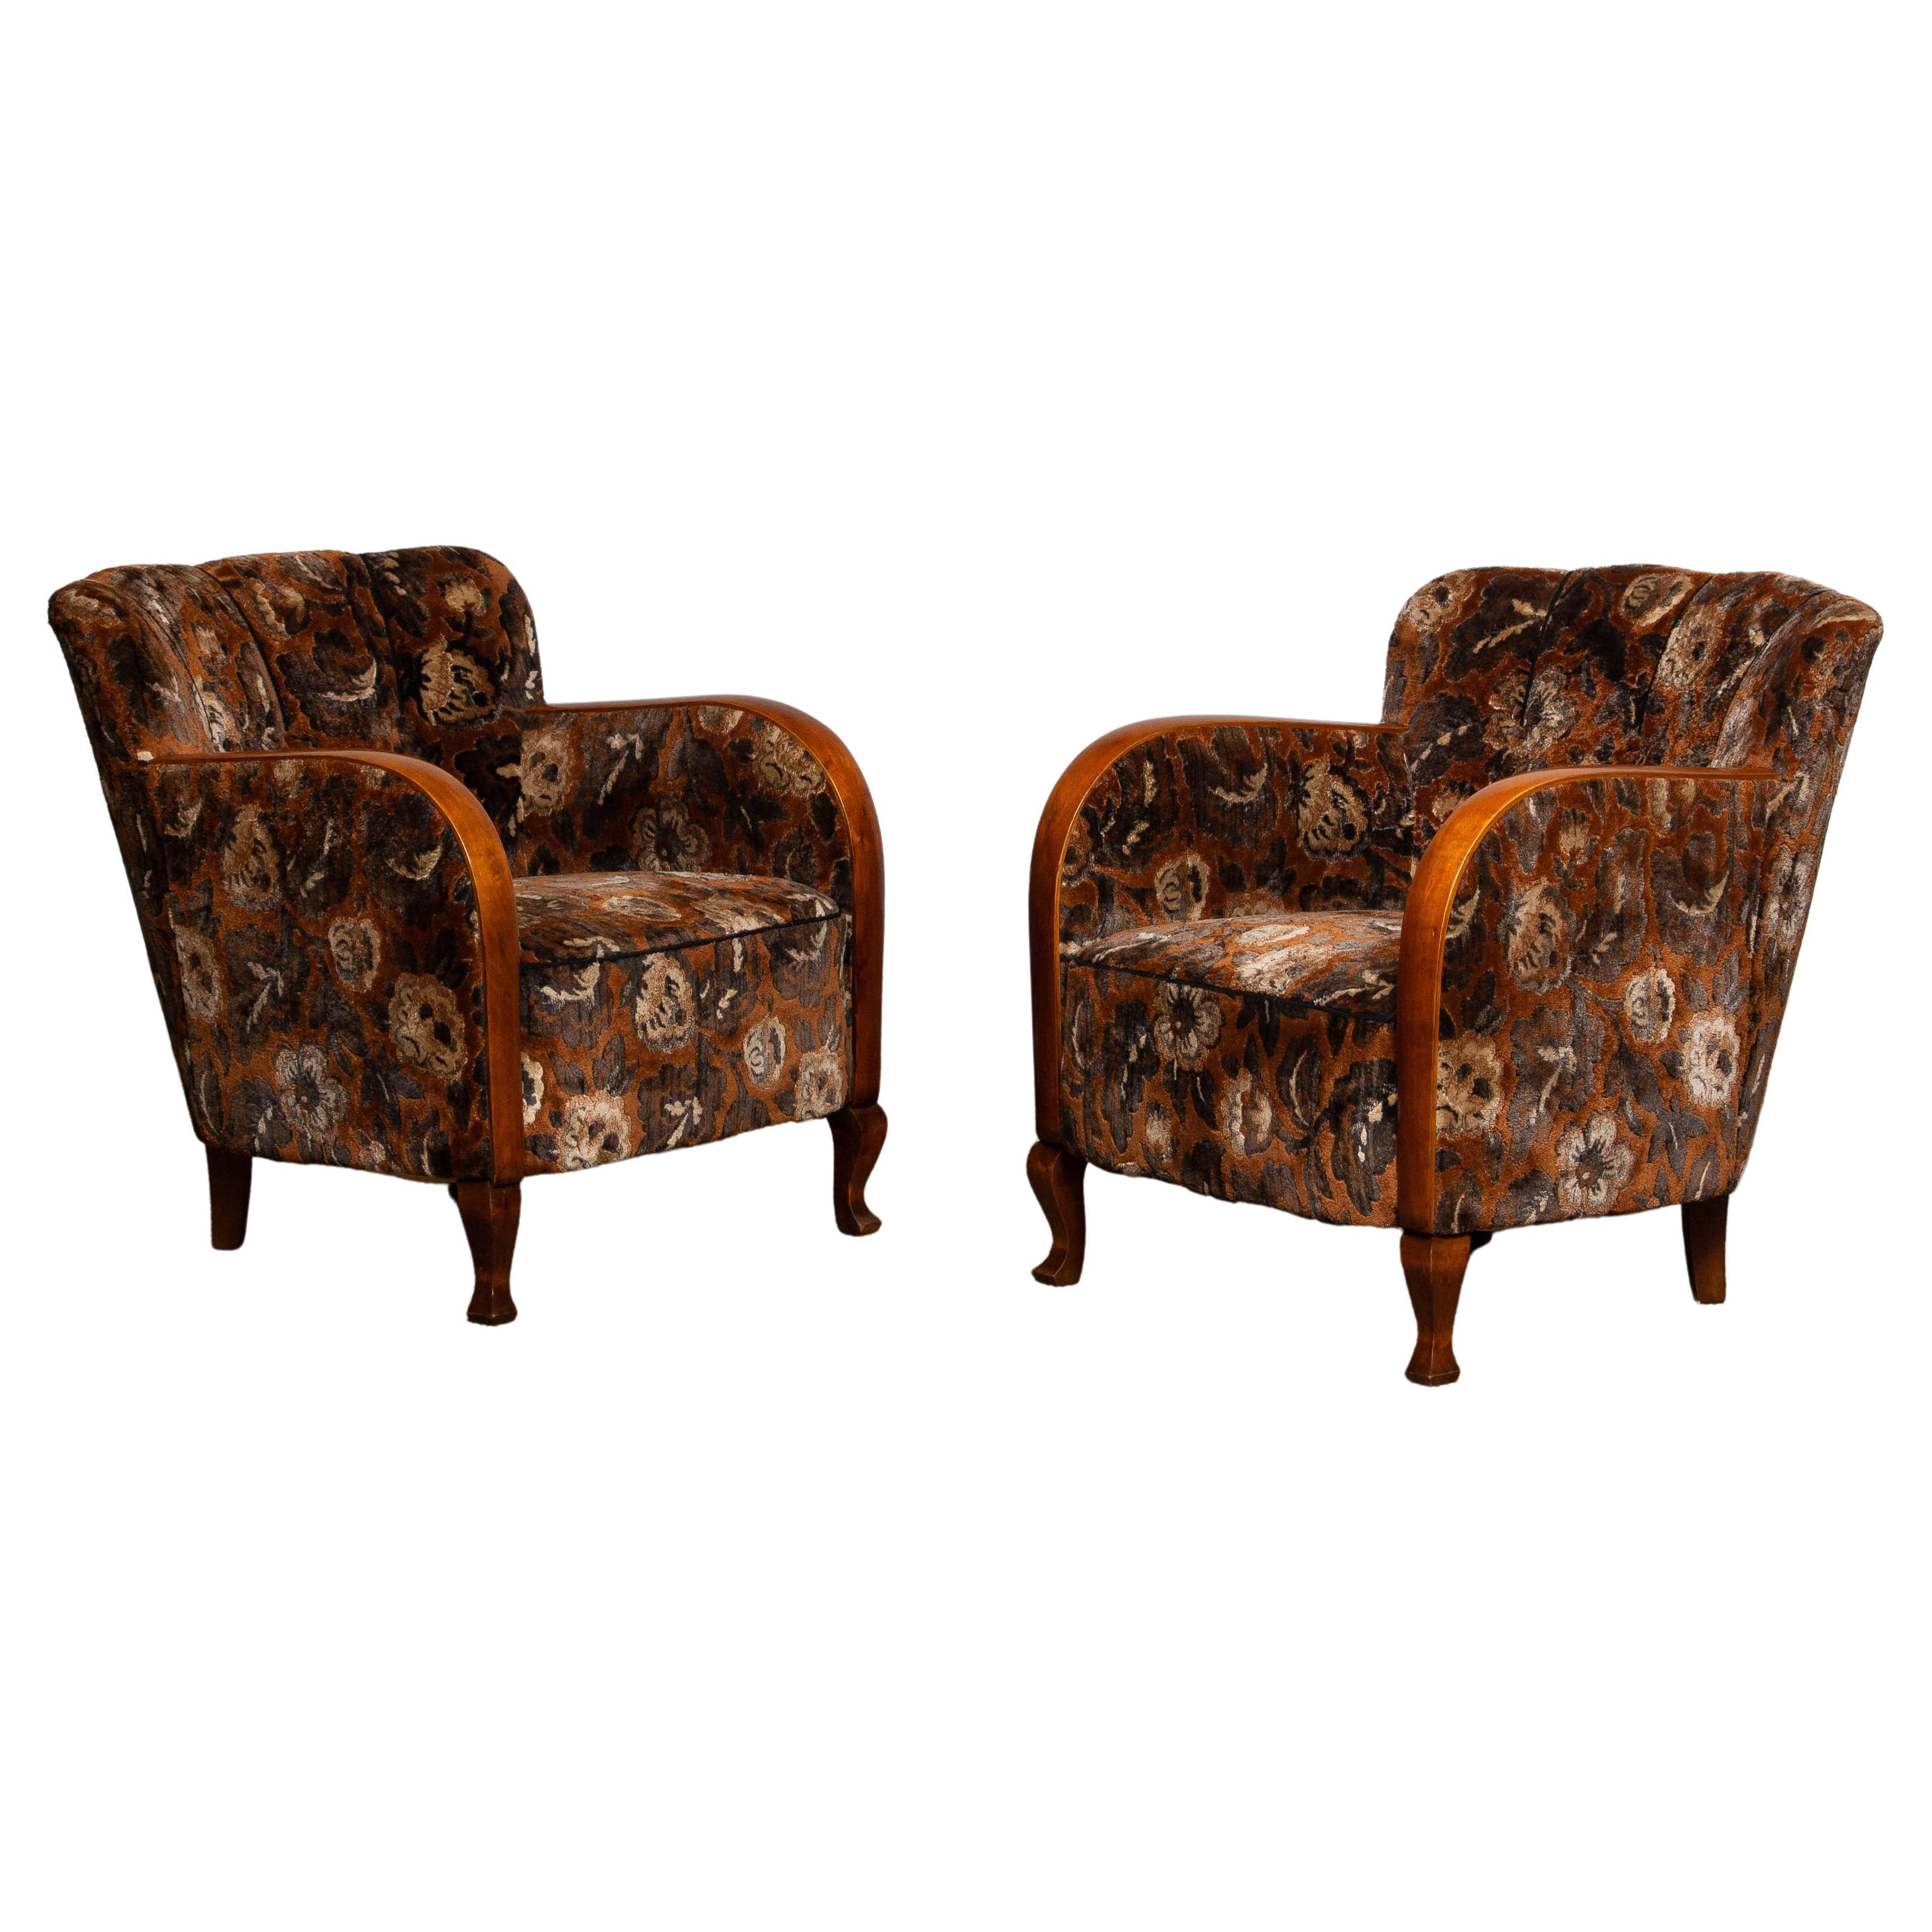 1930's Pair Swedish Art Deco Club Chairs with Floral Rust Jacquard Velvet